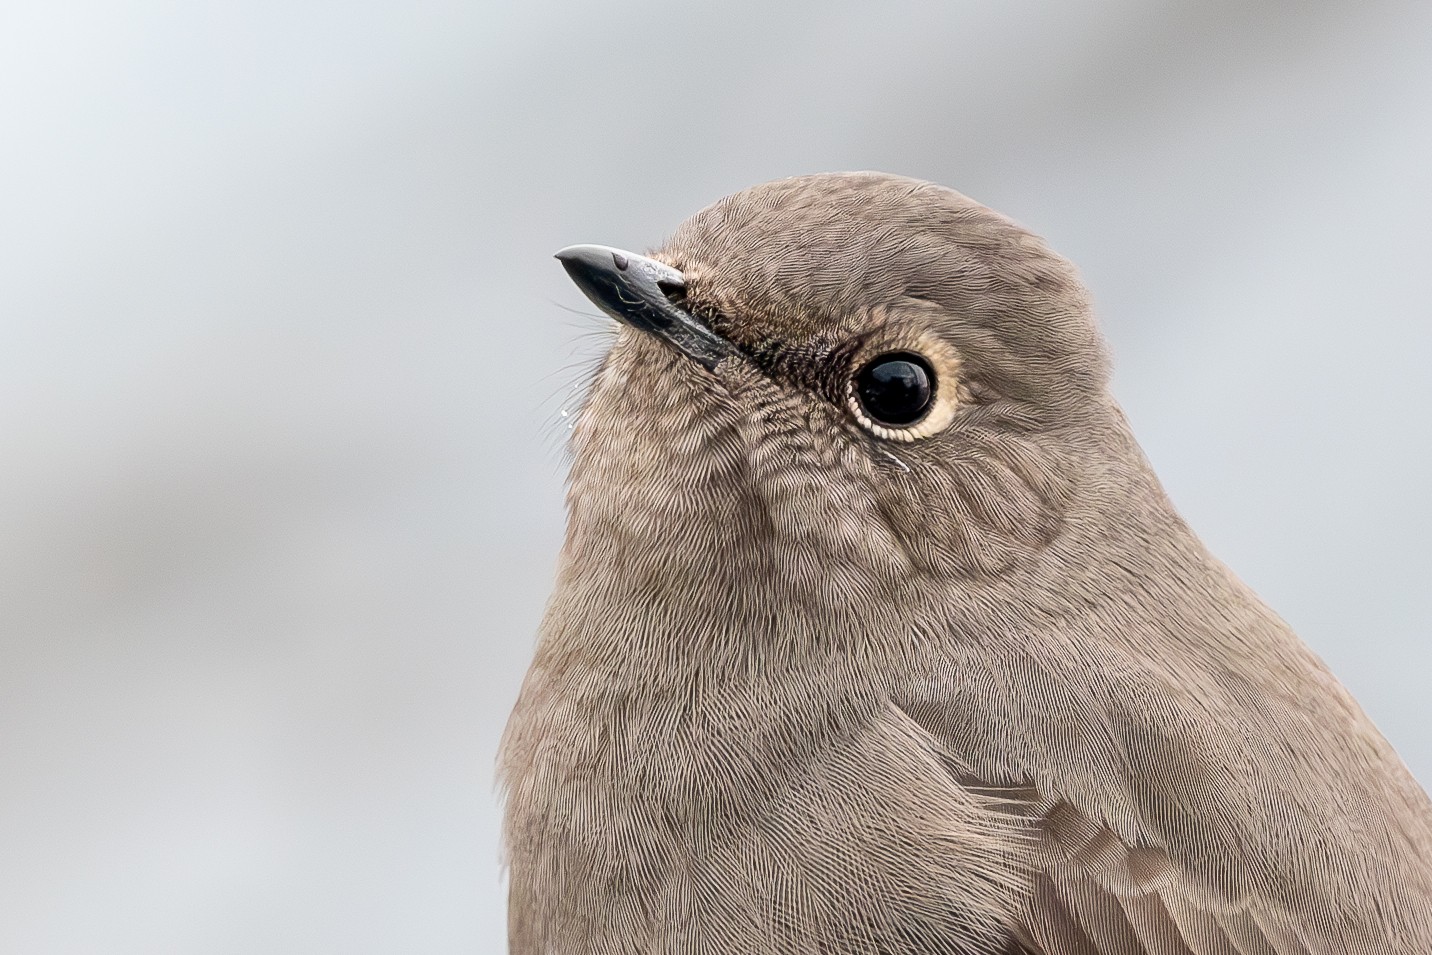  Townsend’s Solitaire